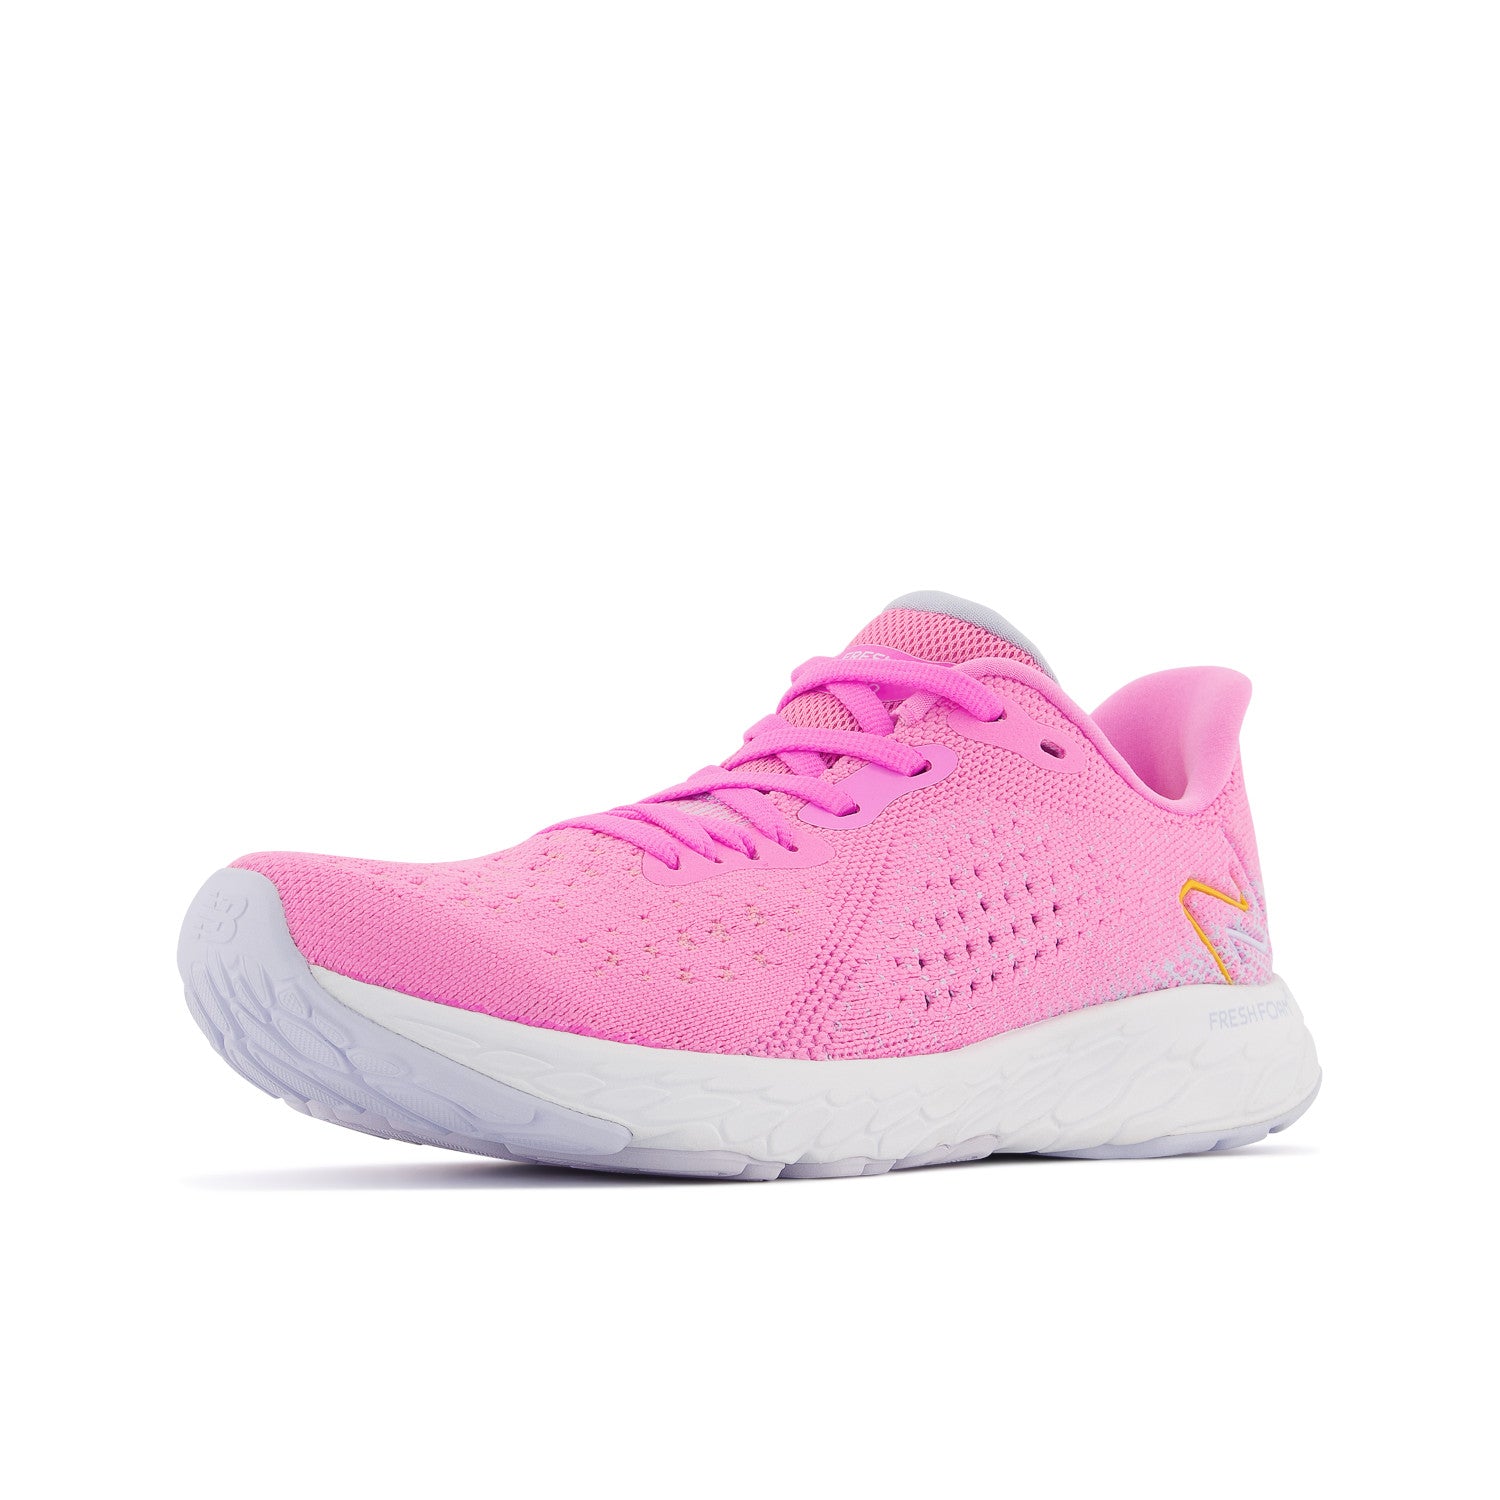 Women's New Balance Fresh Foam X Tempo v2 Color: Pink with White